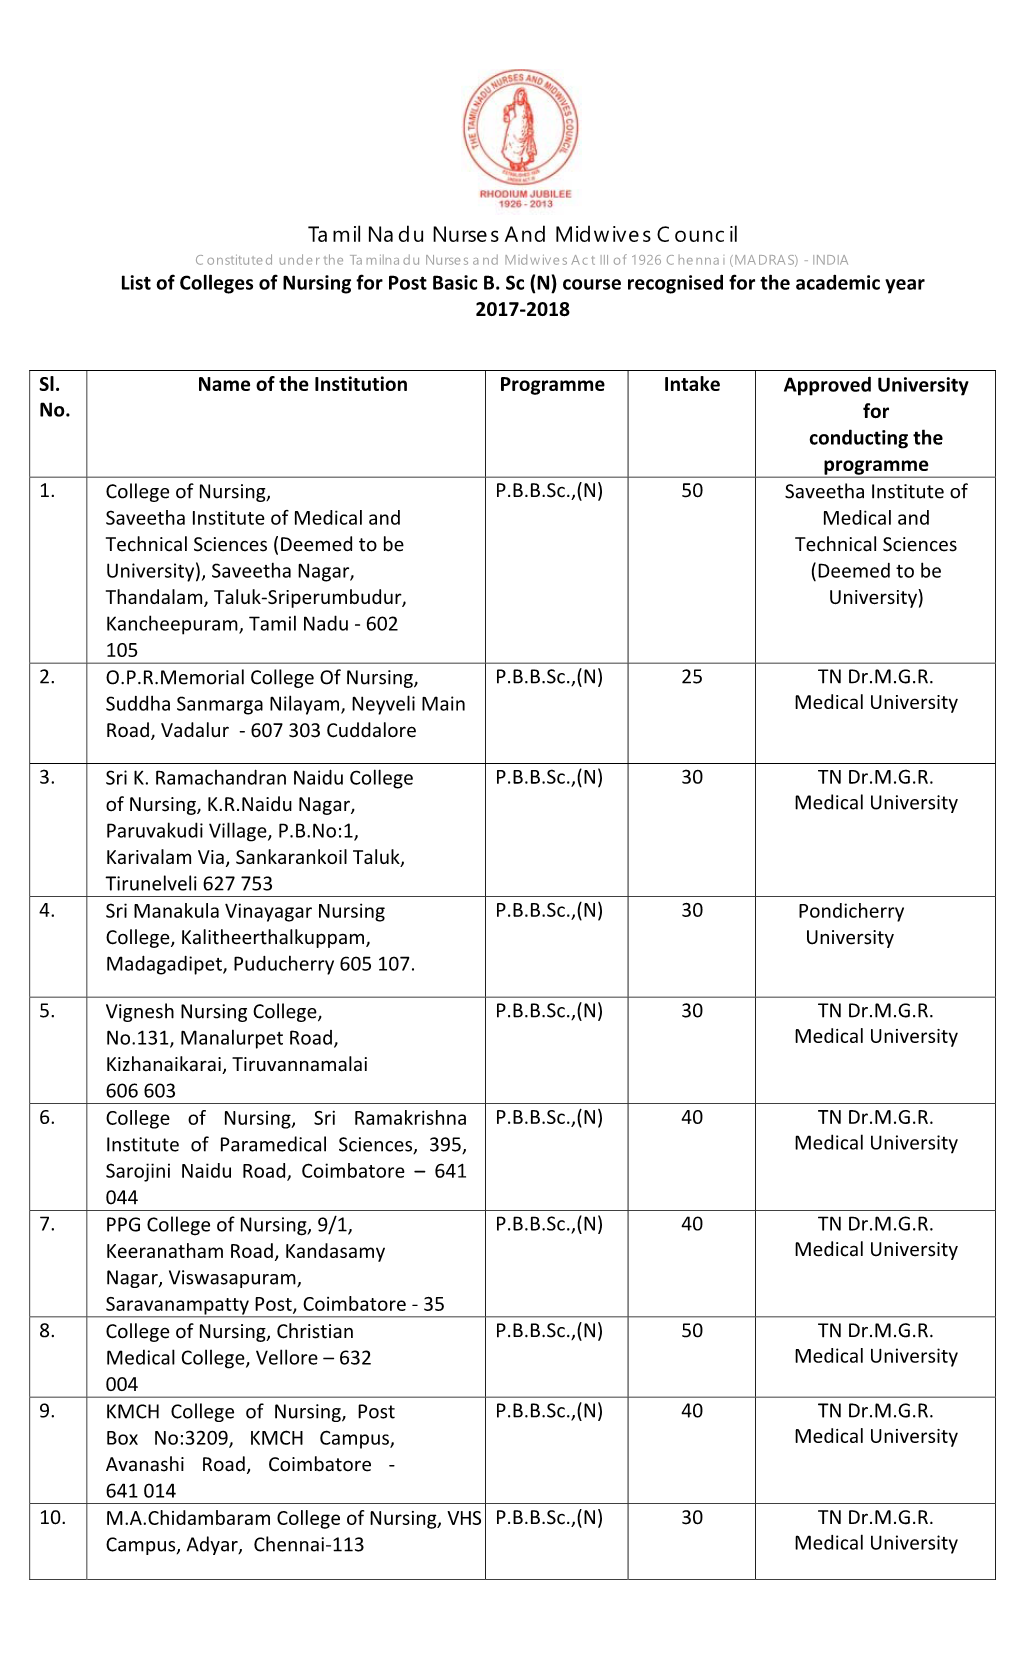 Tamil Nadu Nurses and Midwives Council List of Colleges of Nursing